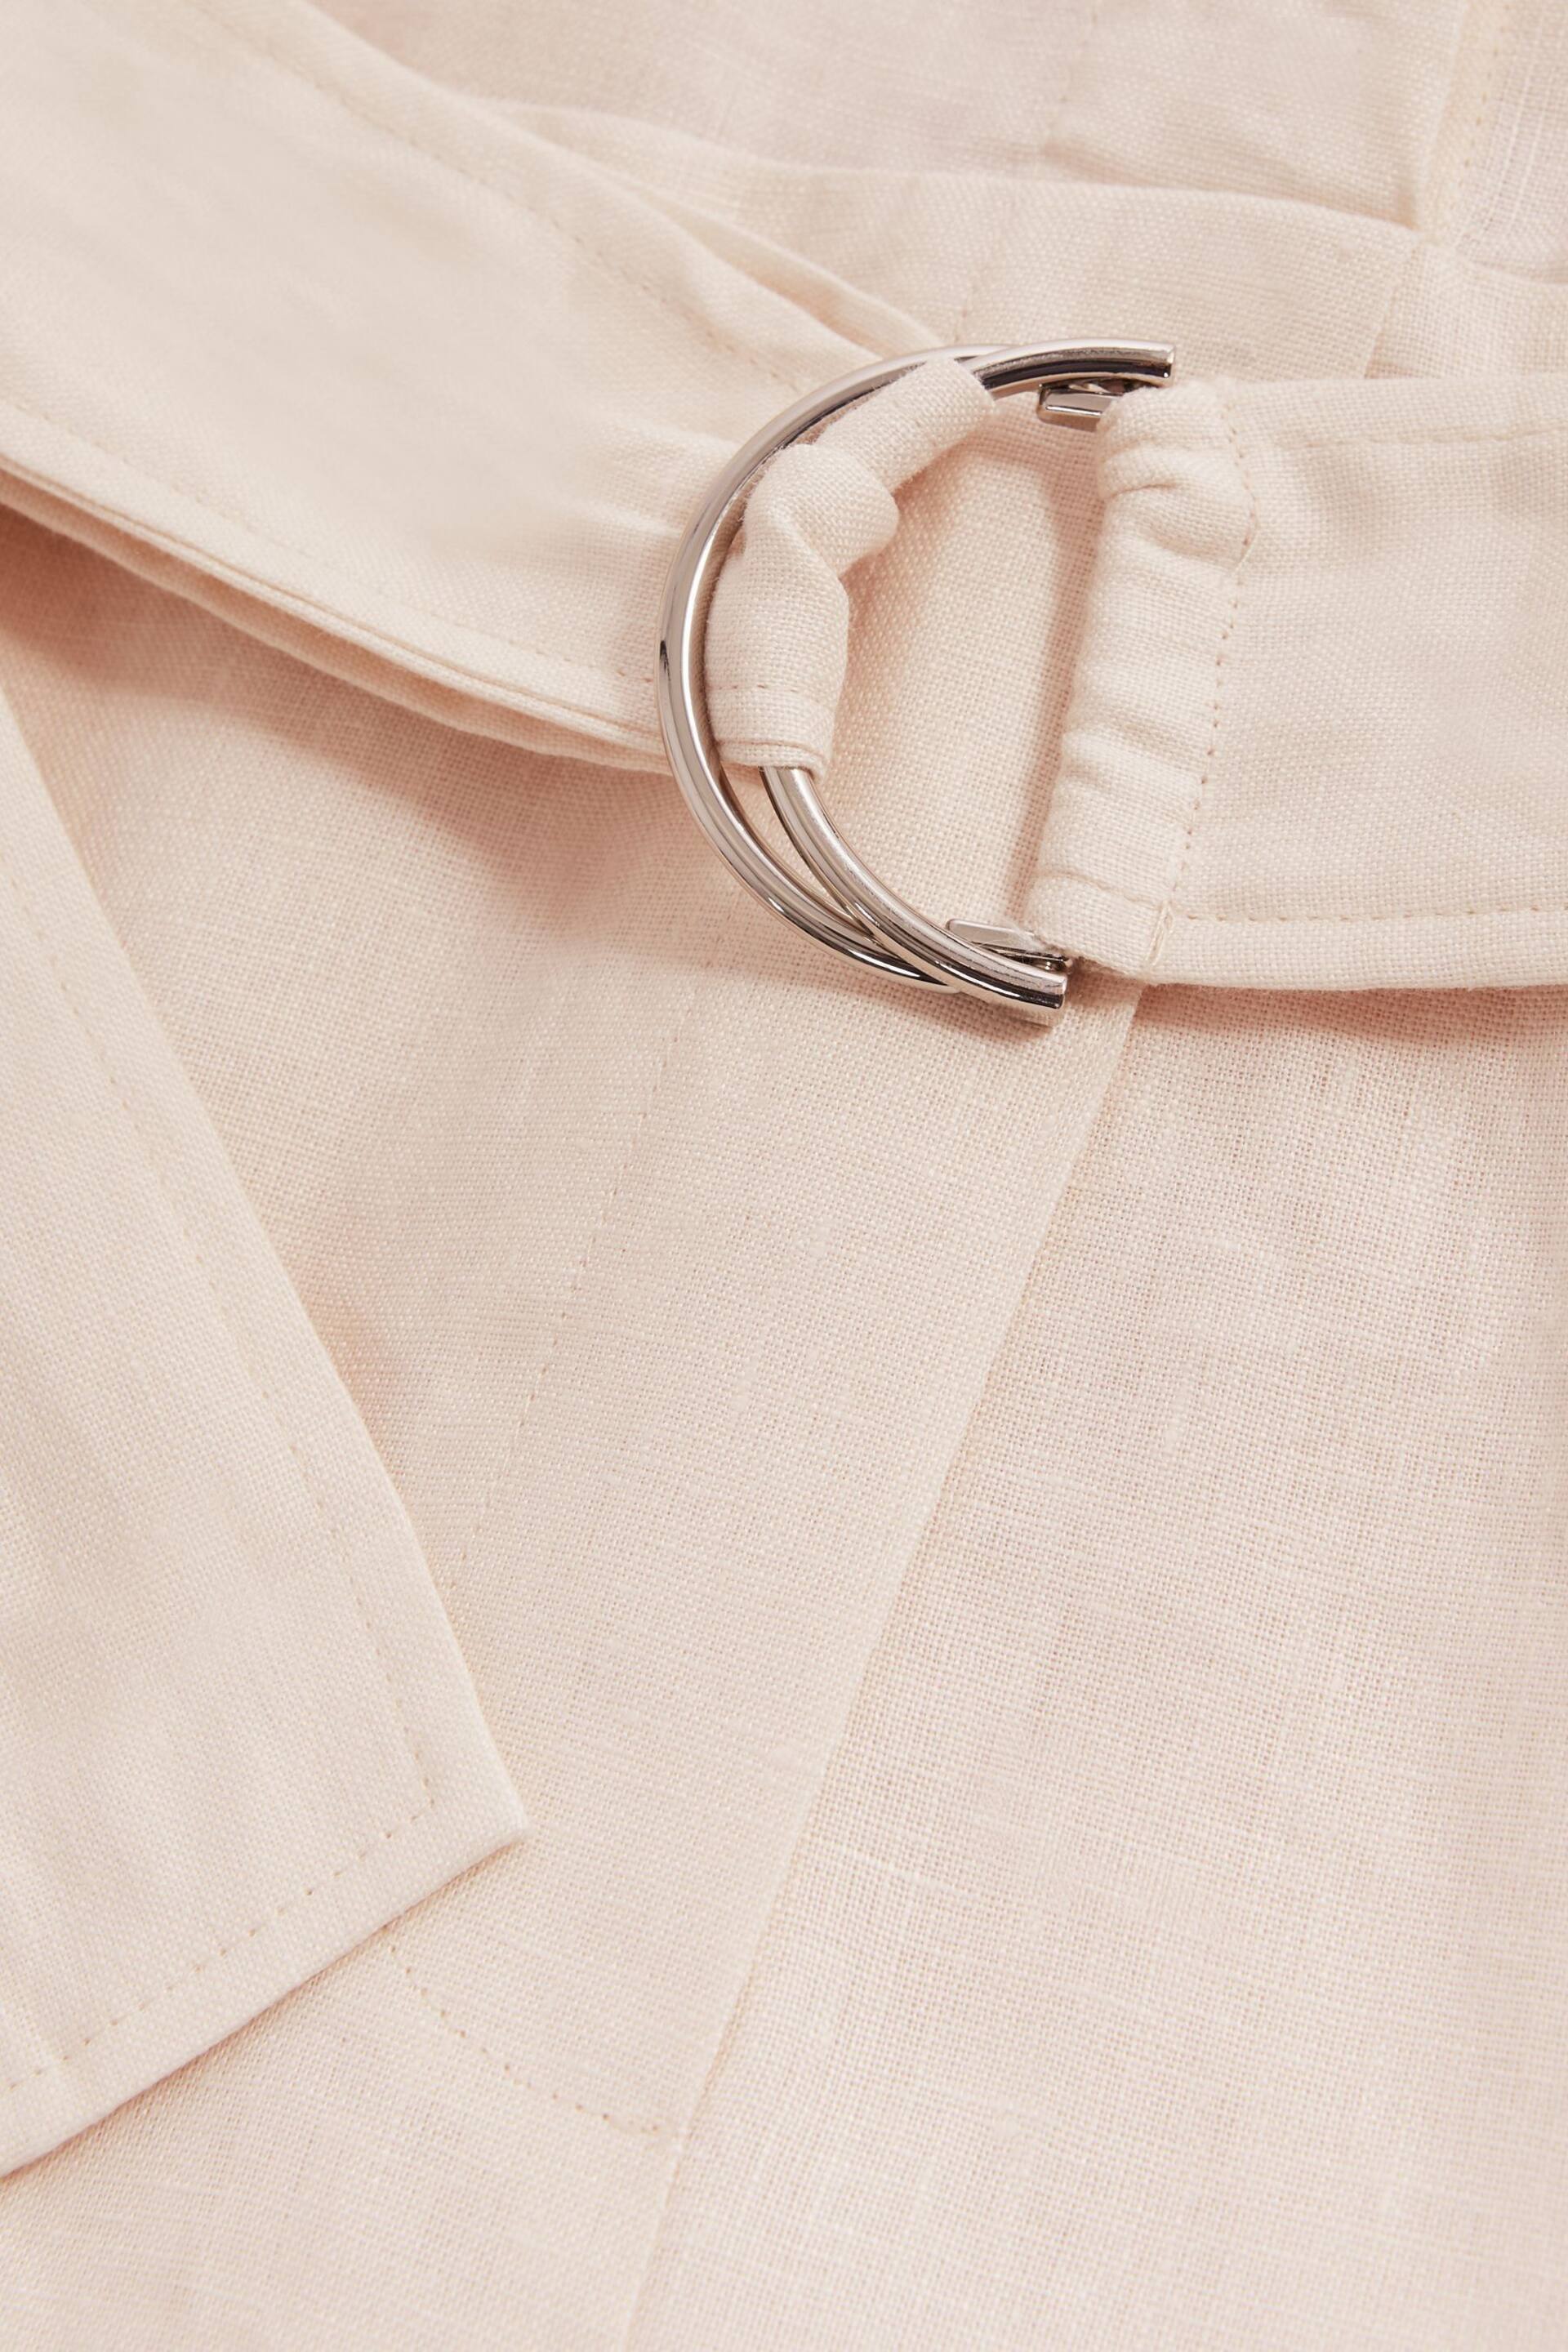 Reiss Pink Selina Linen Belted Playsuit - Image 5 of 5